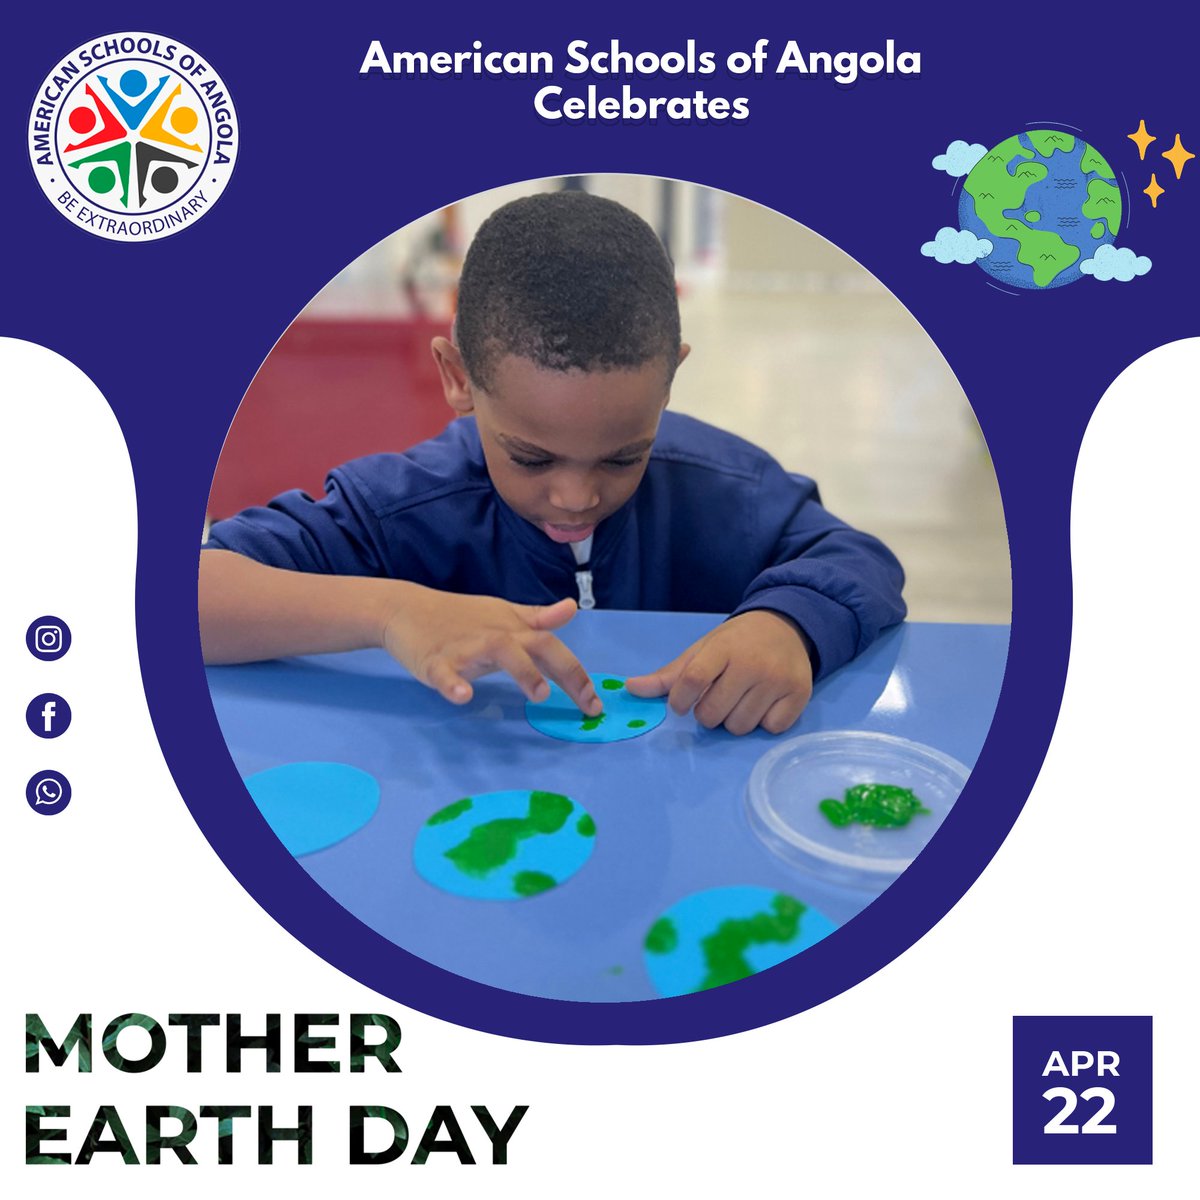 We celebrate World Earth Day to raise awareness about preserving the environment and promoting sustainable development.
#earthday #mothernature #asangola #beextraordinary